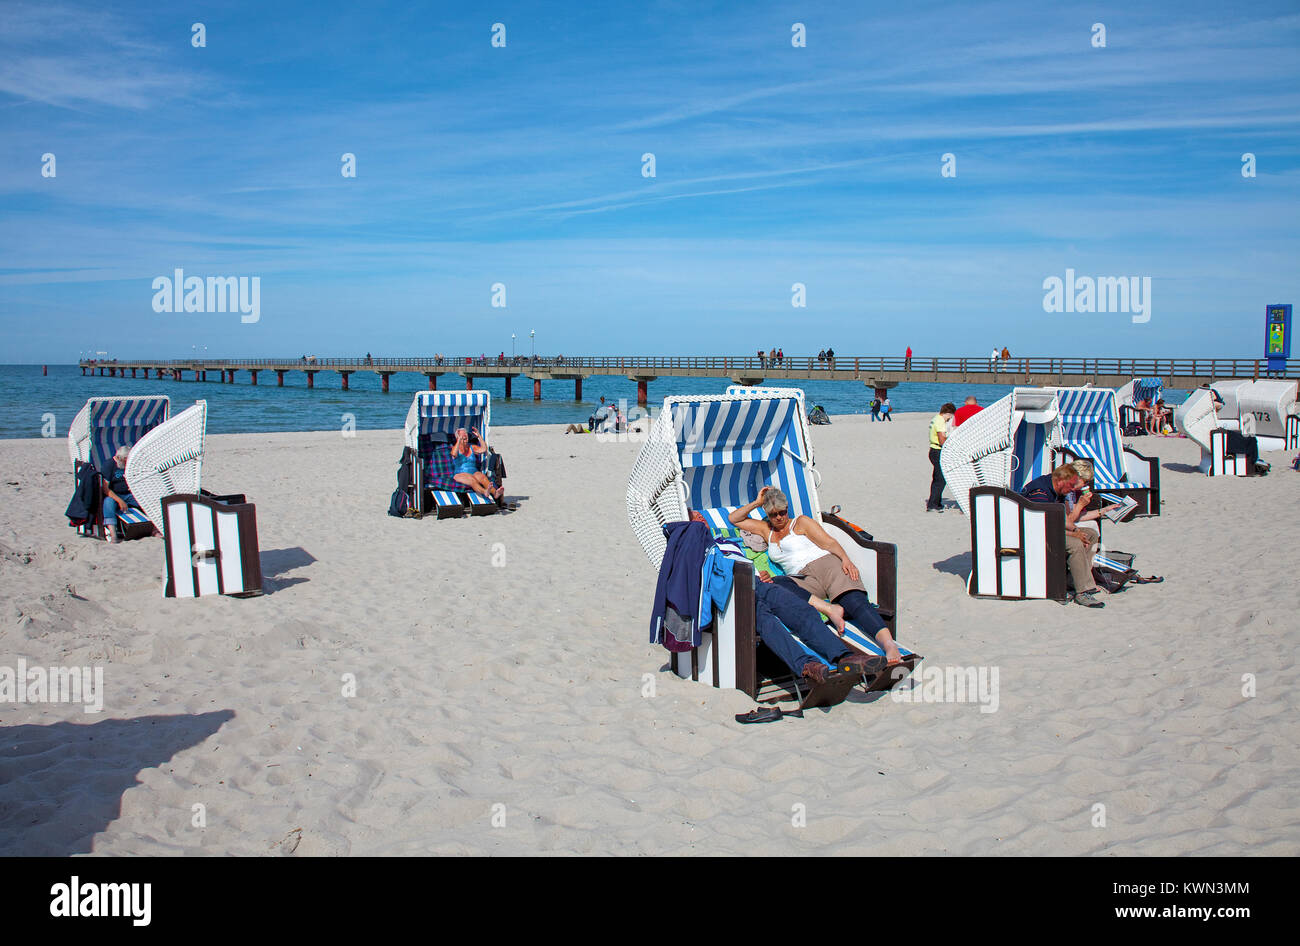 Traditional beach chairs at the beach of Prerow, Fishland, Mecklenburg-Western Pomerania, Baltic sea, Germany, Europe Stock Photo